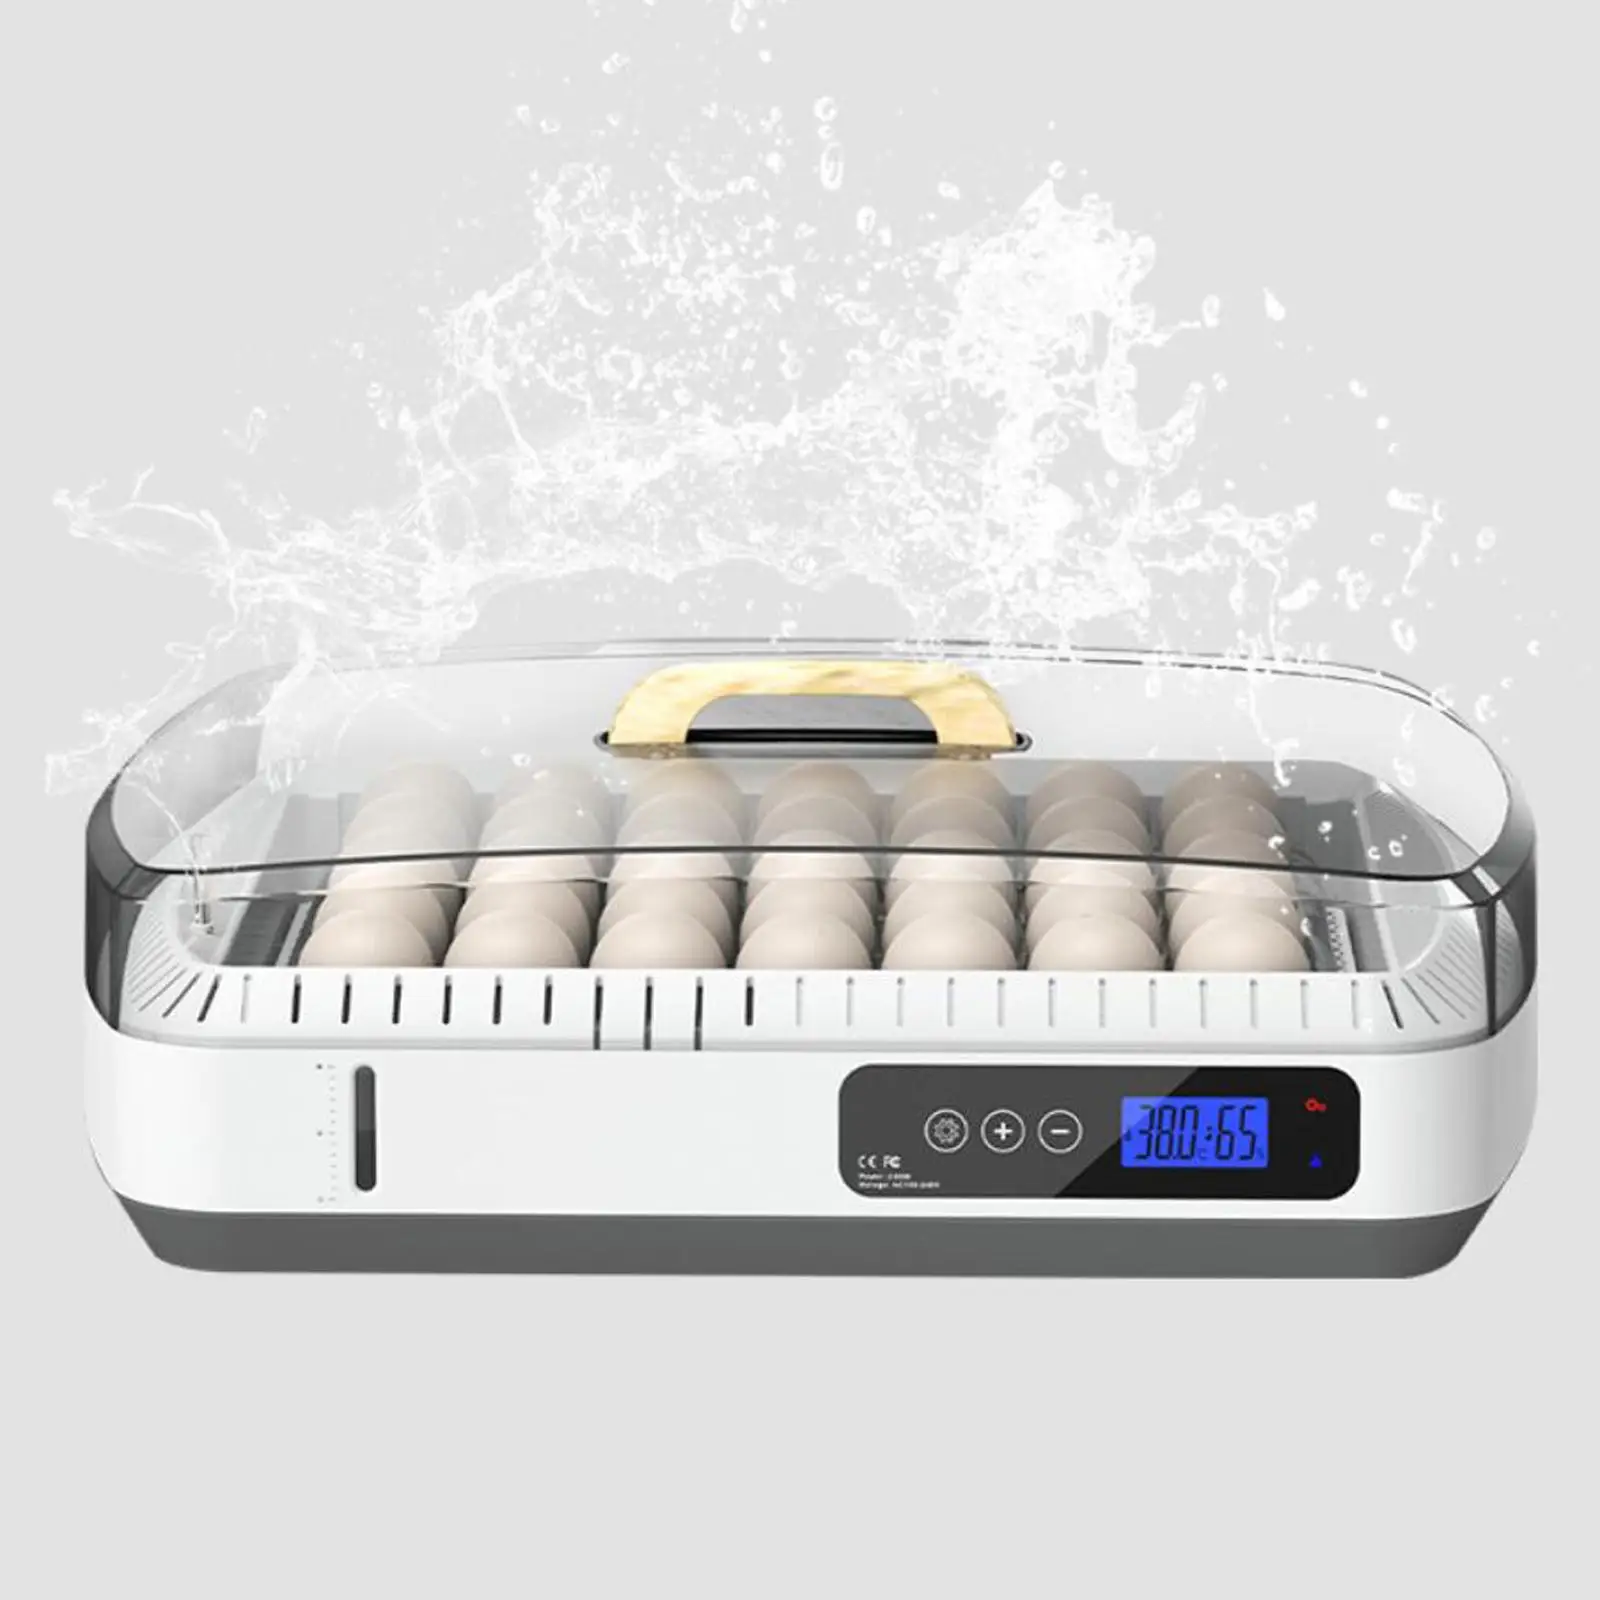 Digital Automatic Egg Incubator Poultry Hatcher for Quail Hatching Turkey Chicken